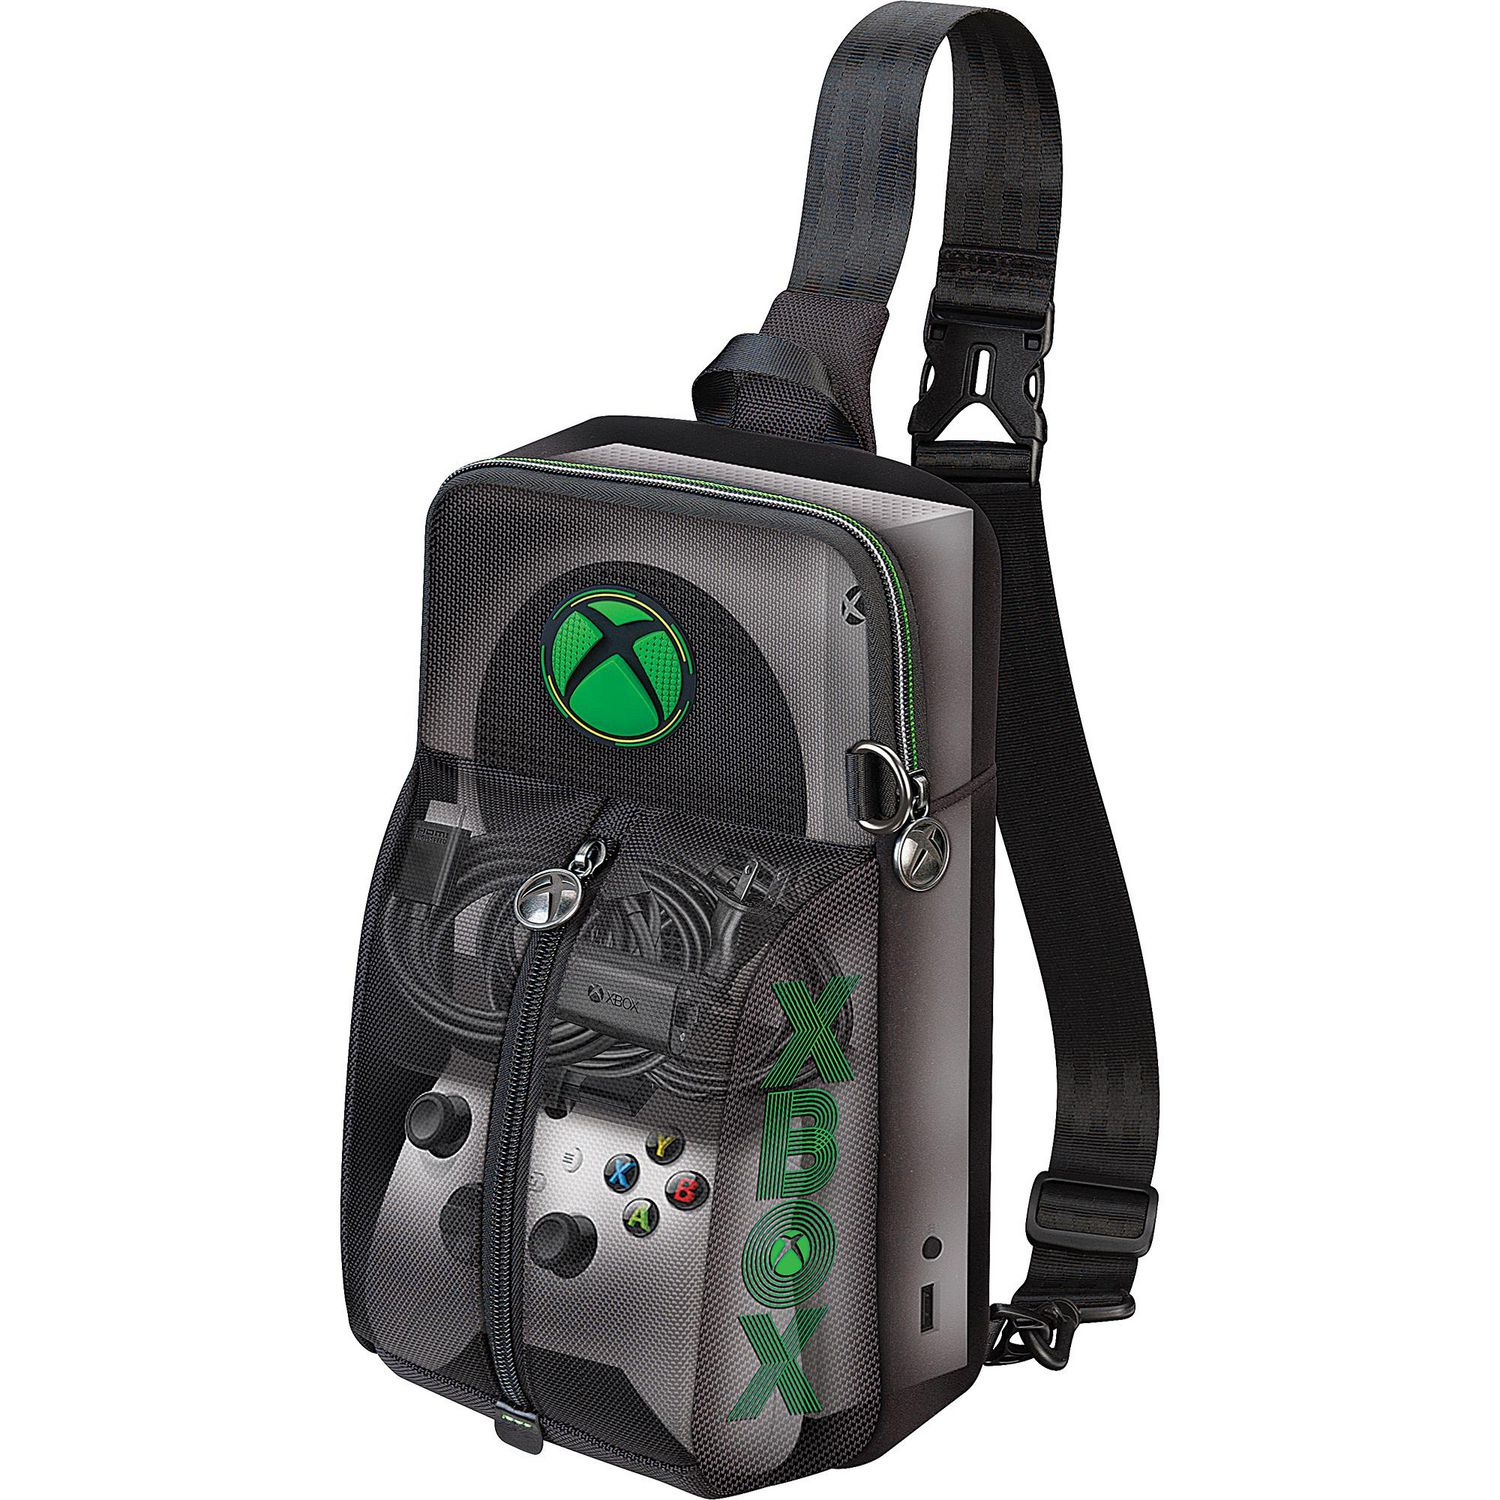 Just picked up an original Xbox carrying bag and want to clean it : r/xbox